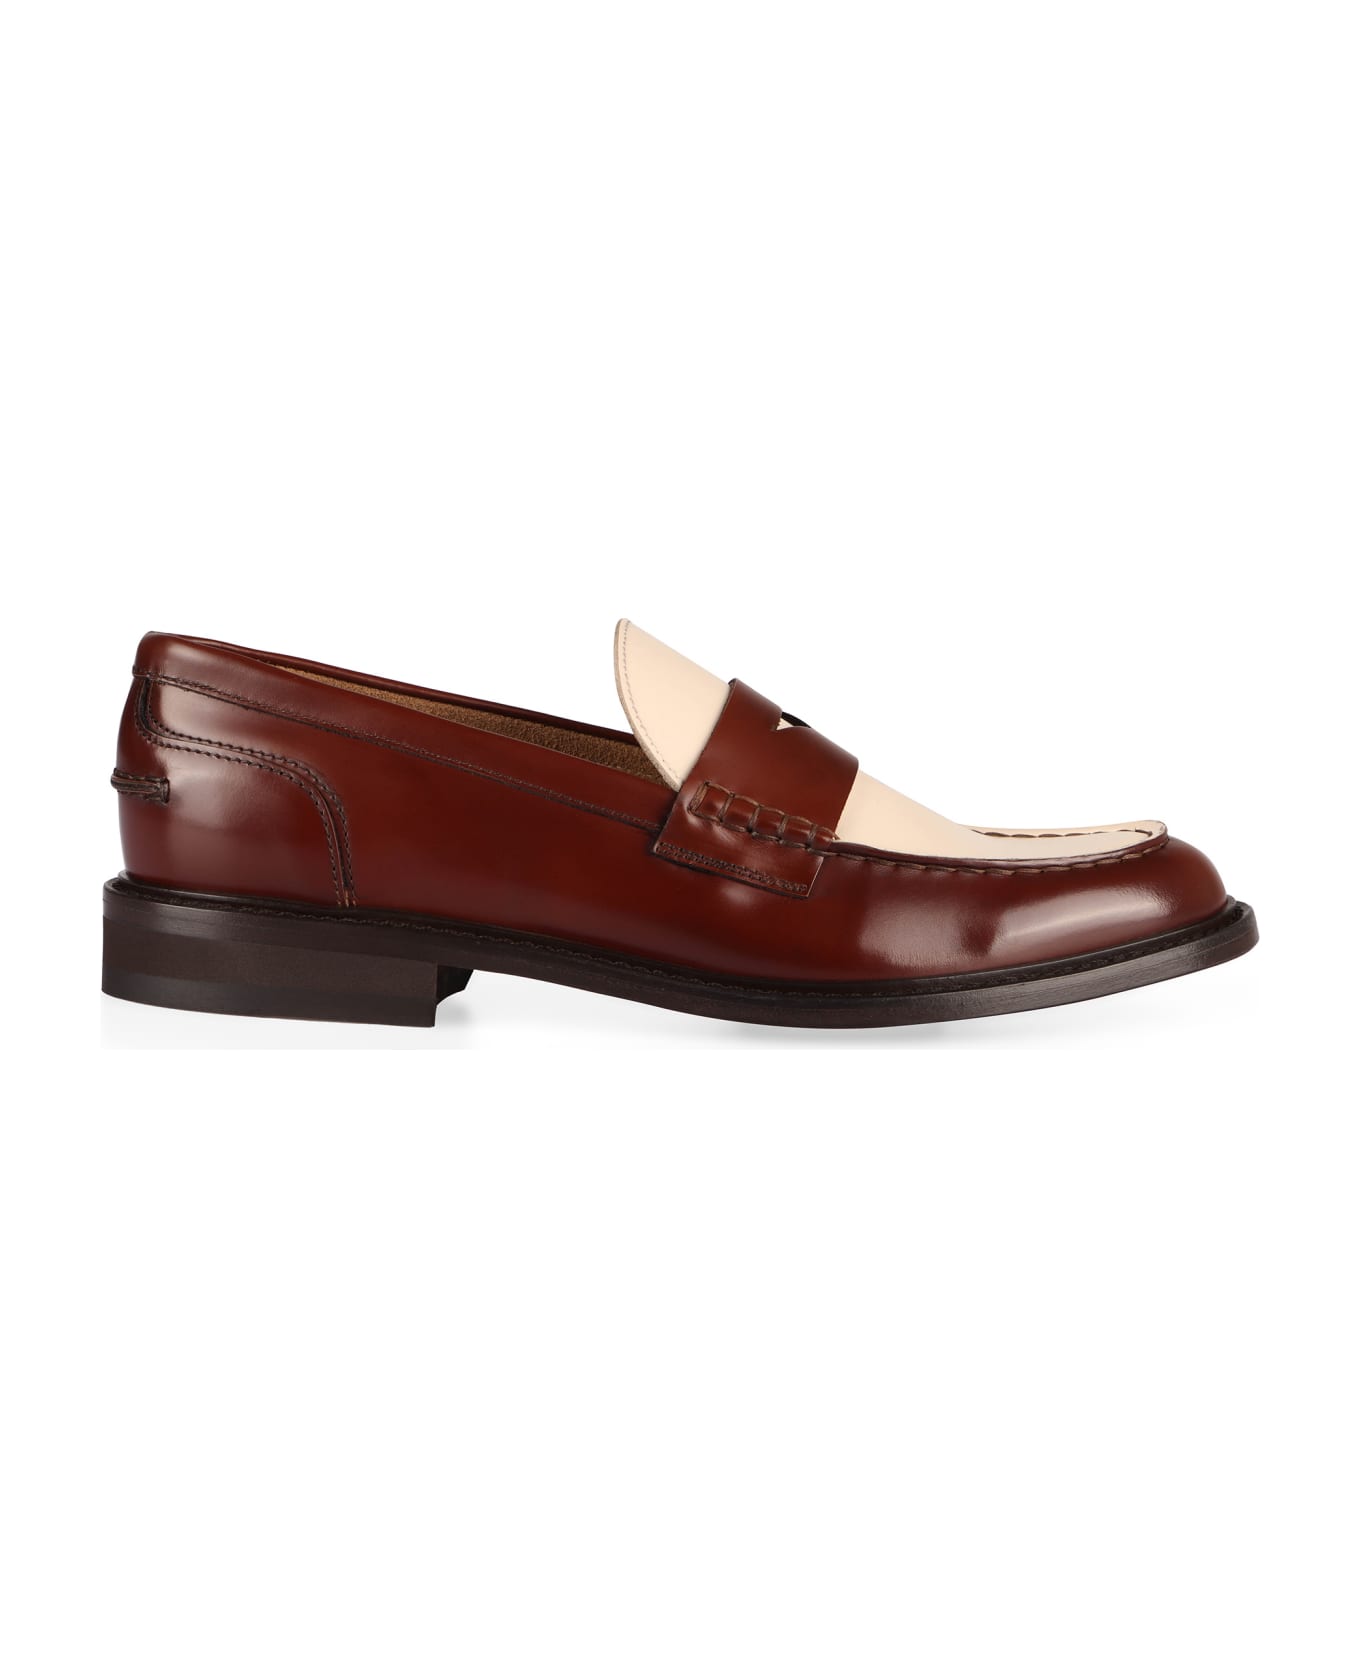 Doucal's Leather Loafers - brown フラットシューズ